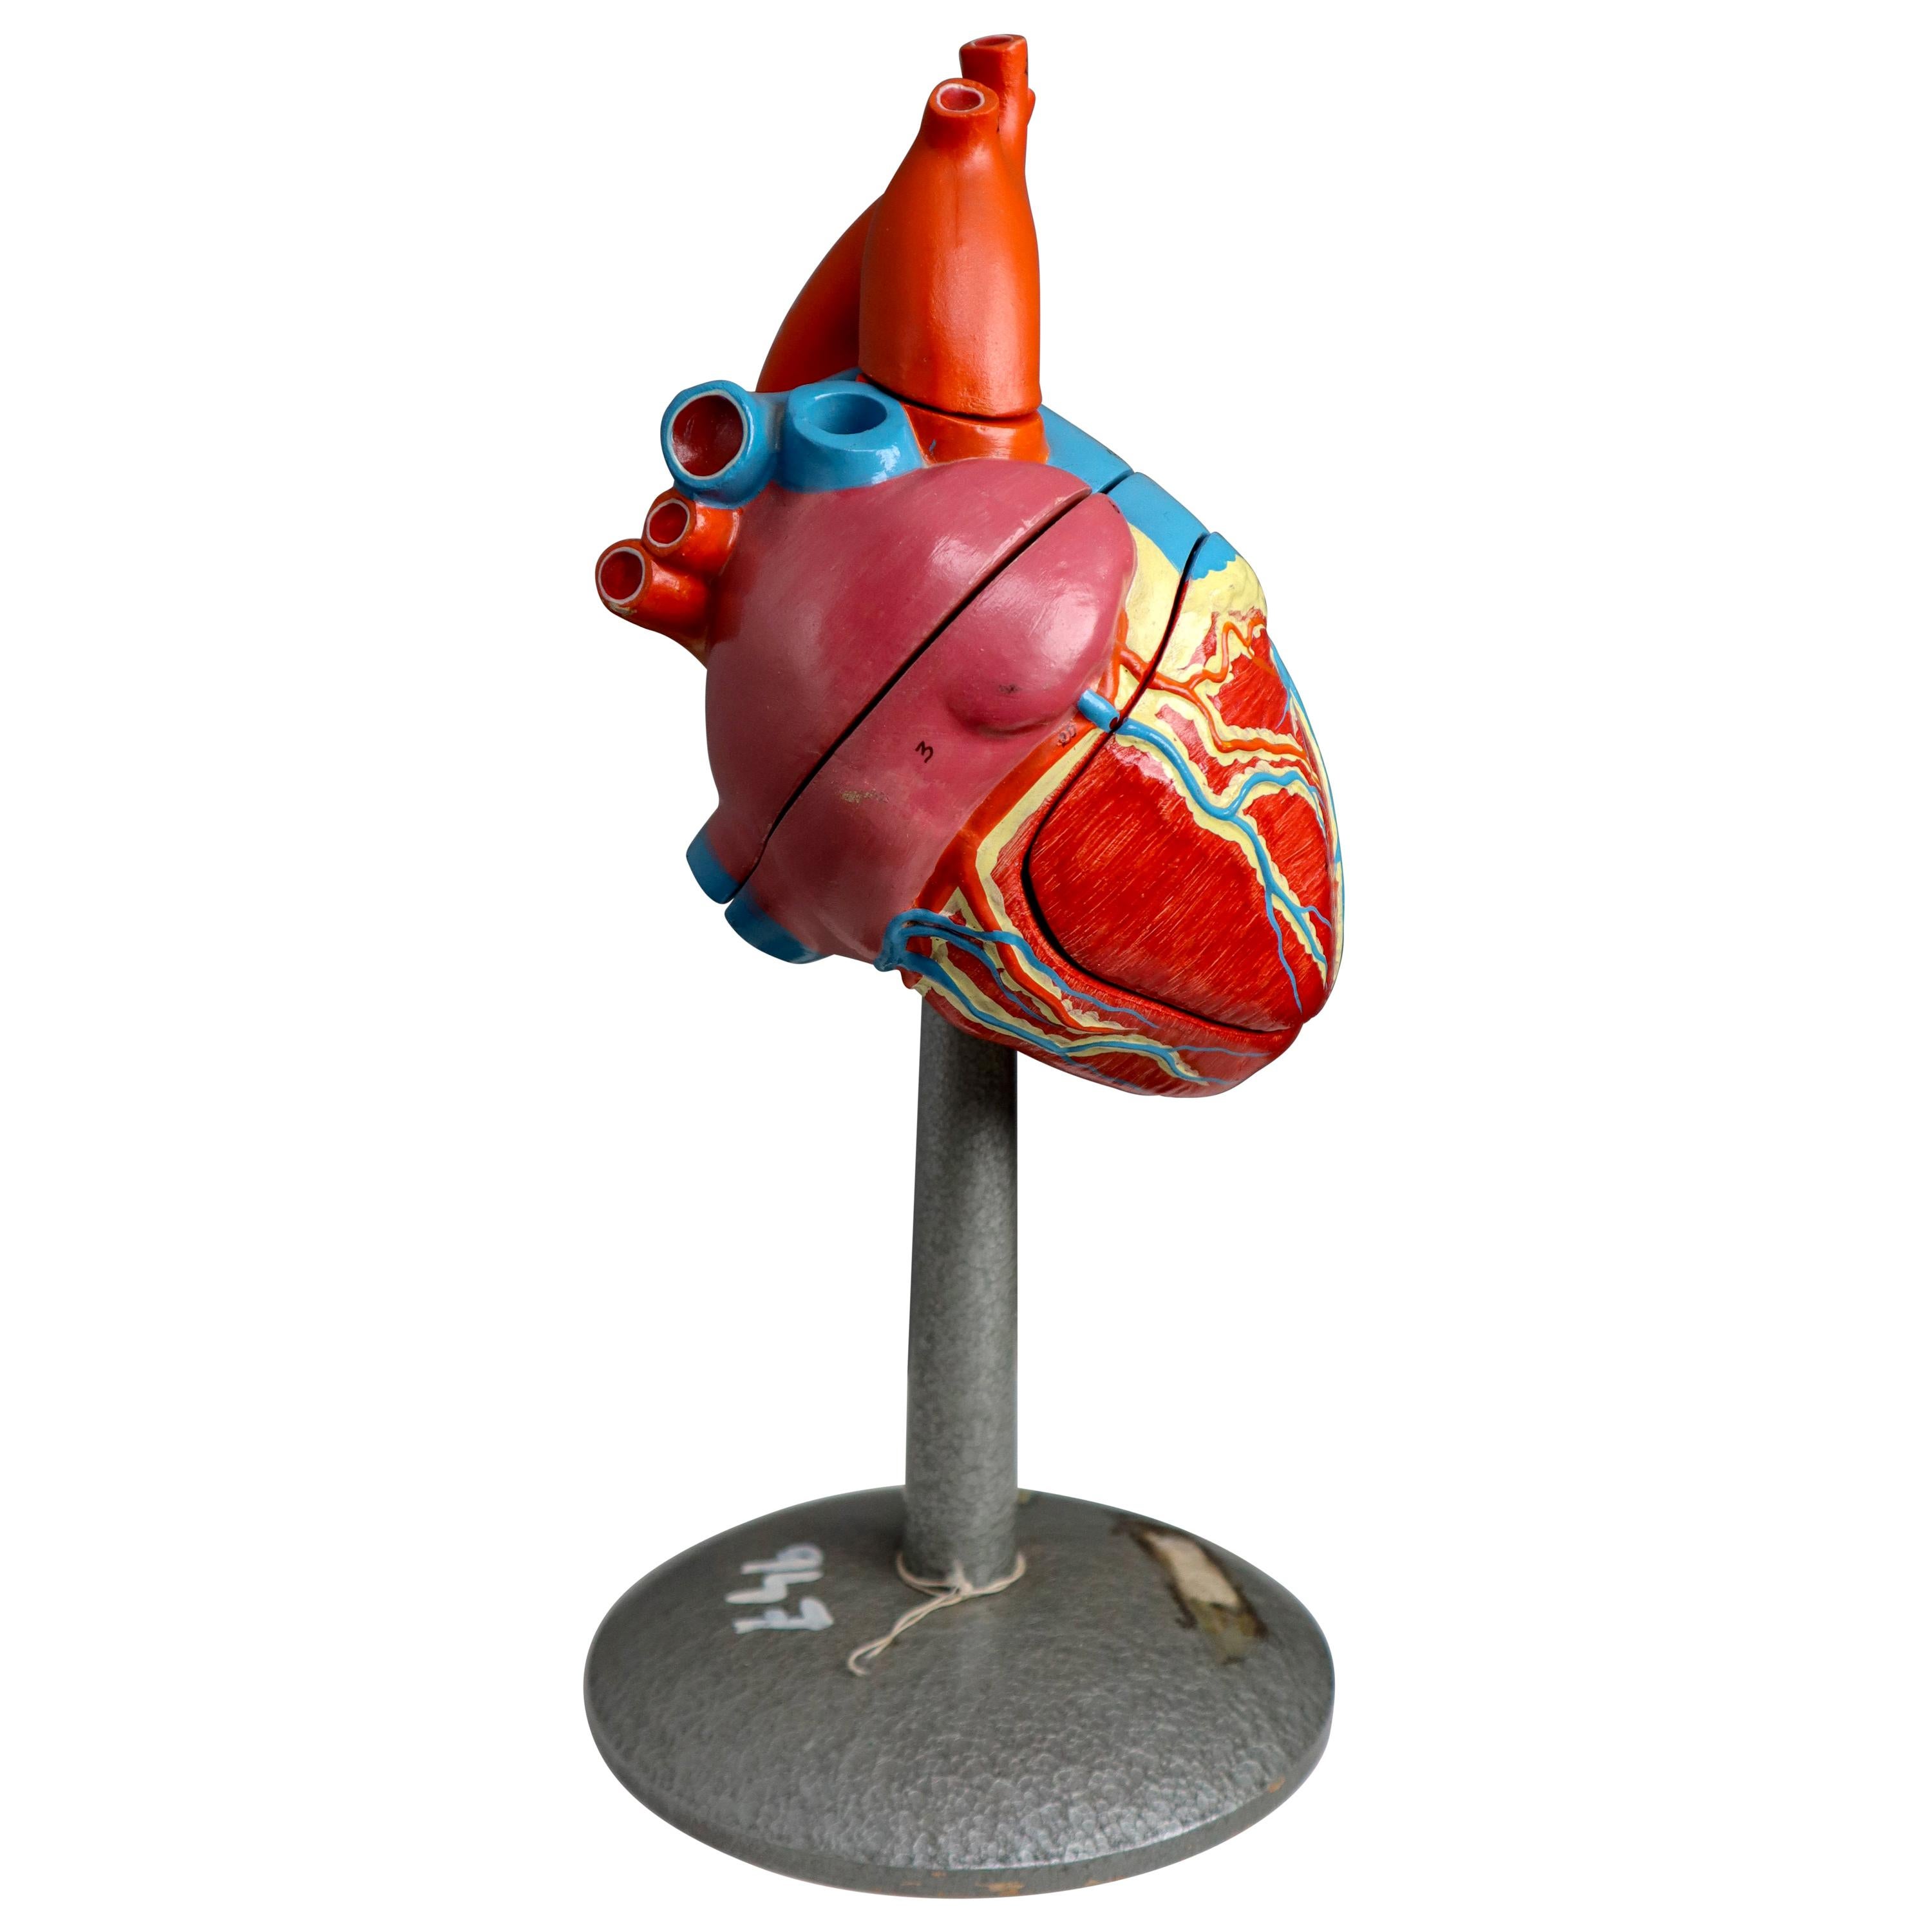 Large Anatomical Teaching Model "Heart" Germany, 1940s